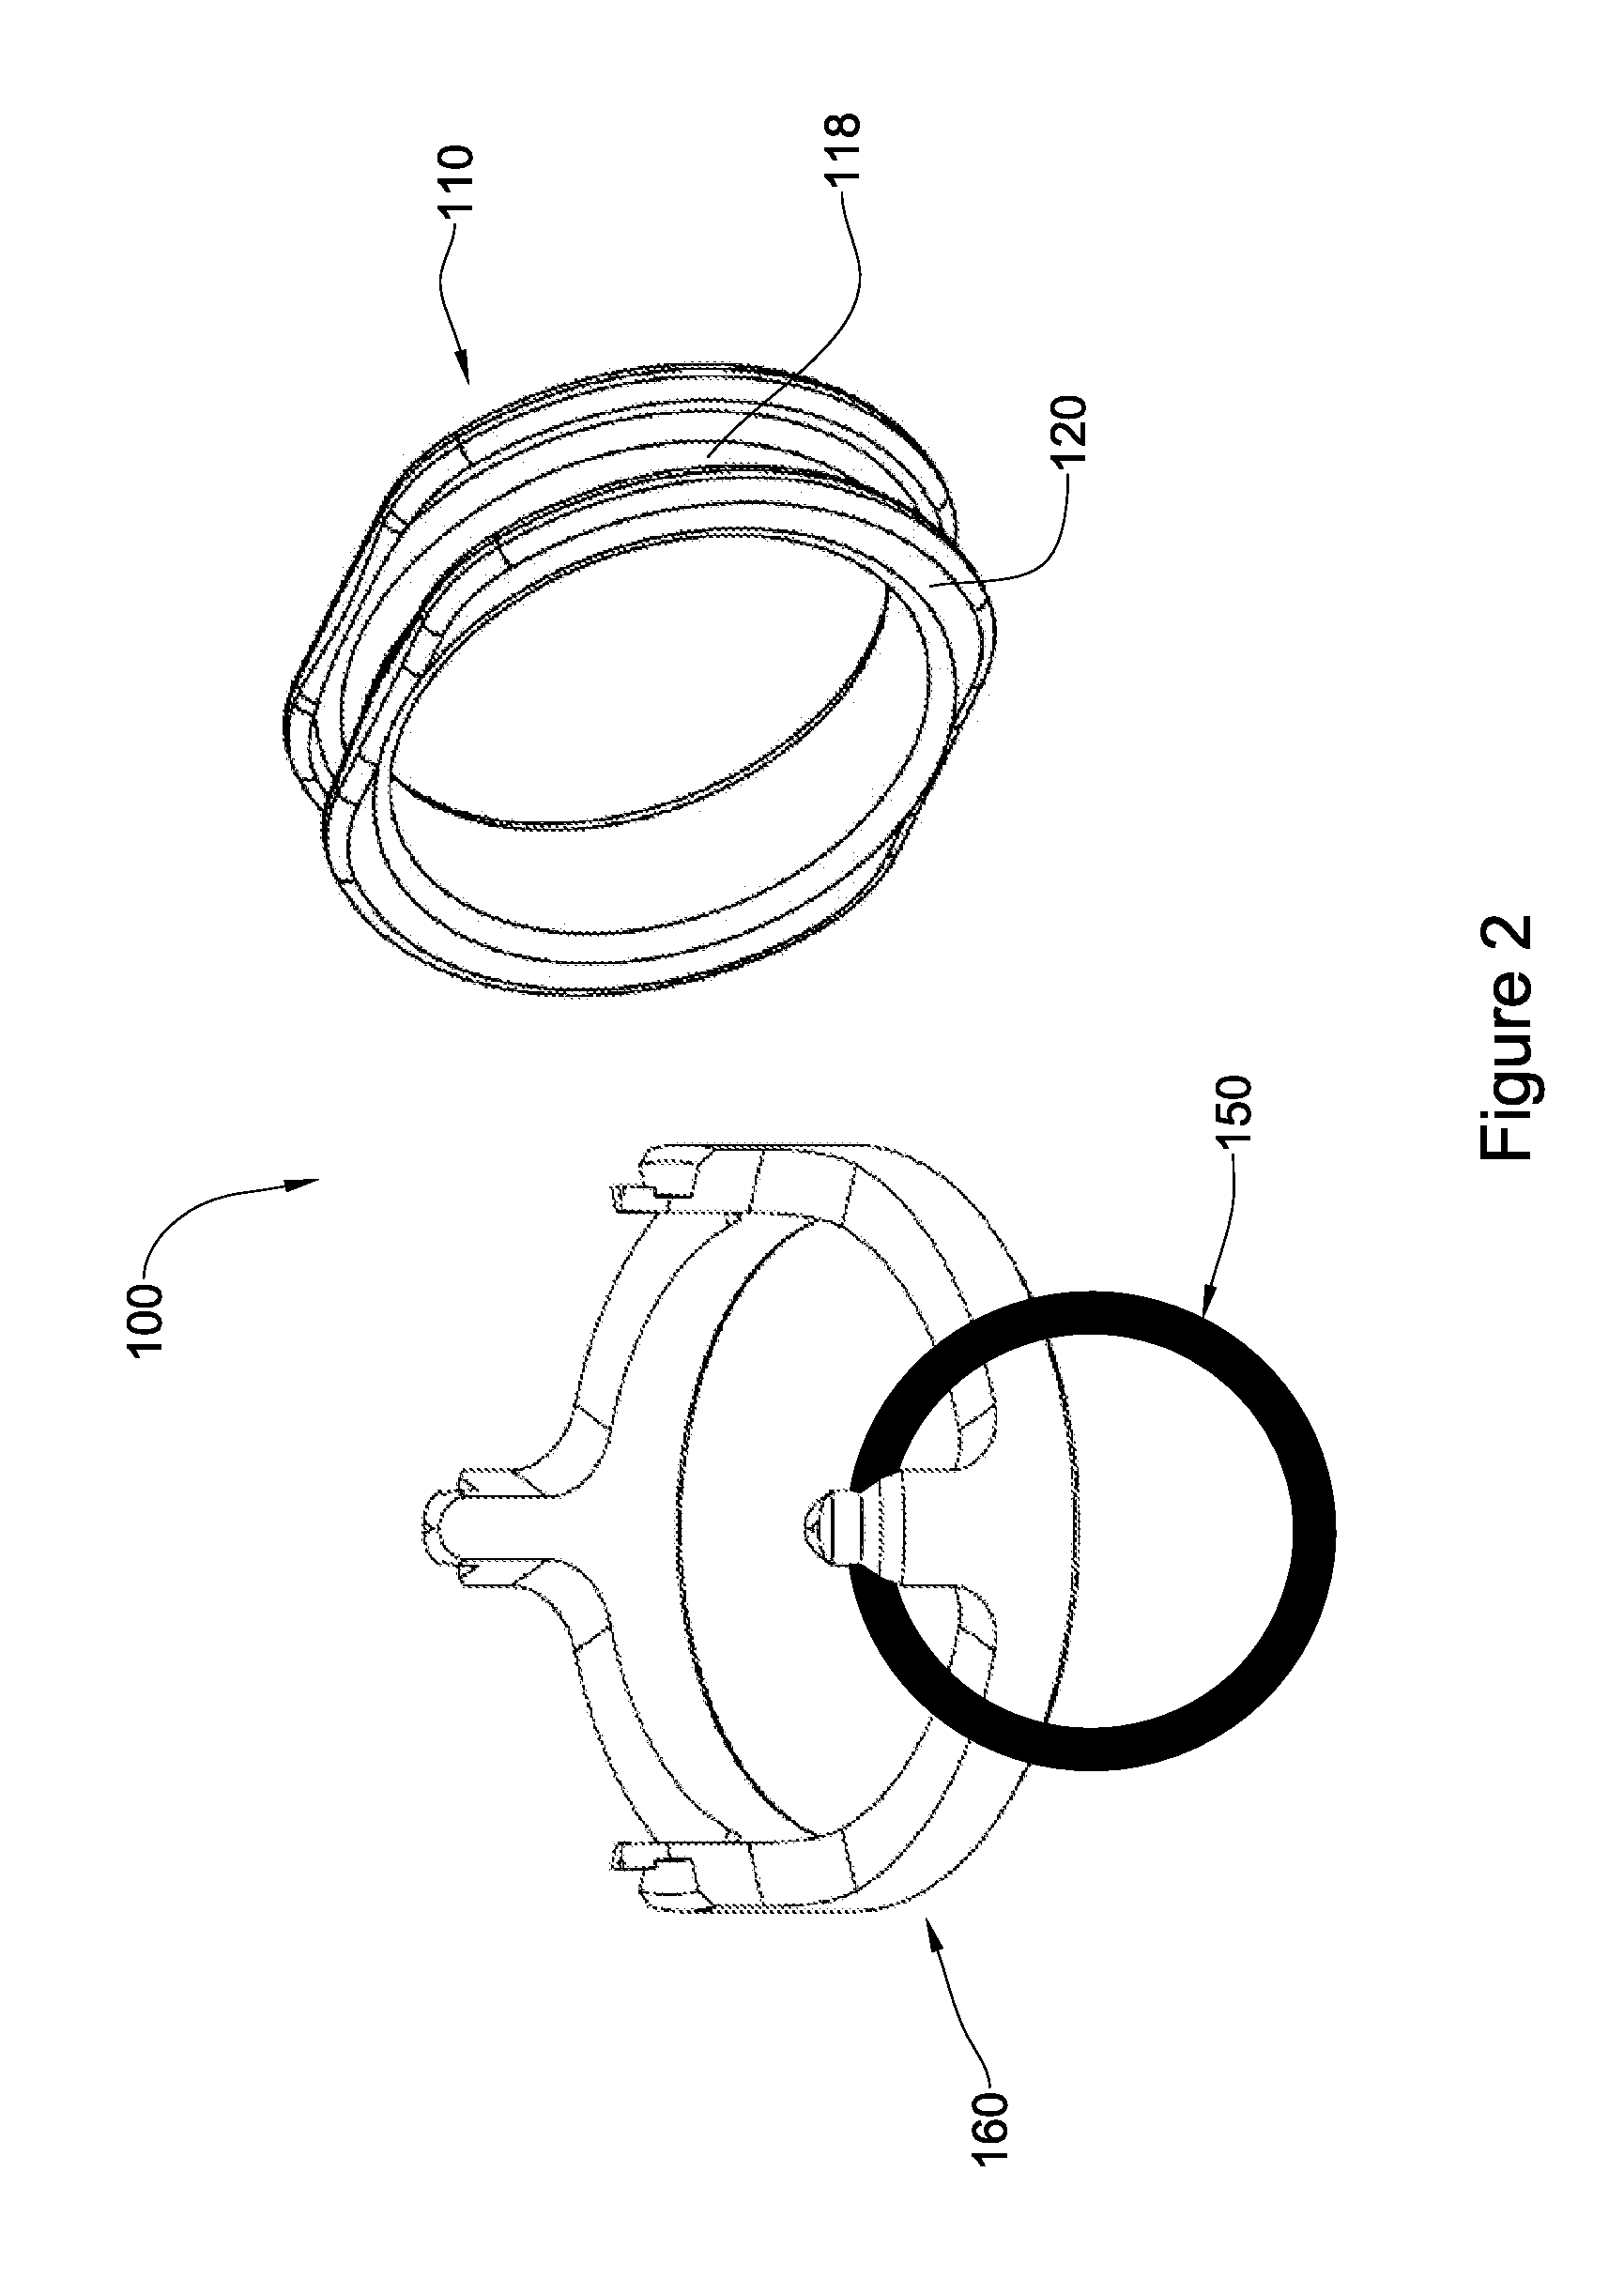 Support element for circumcision and system comprising the same